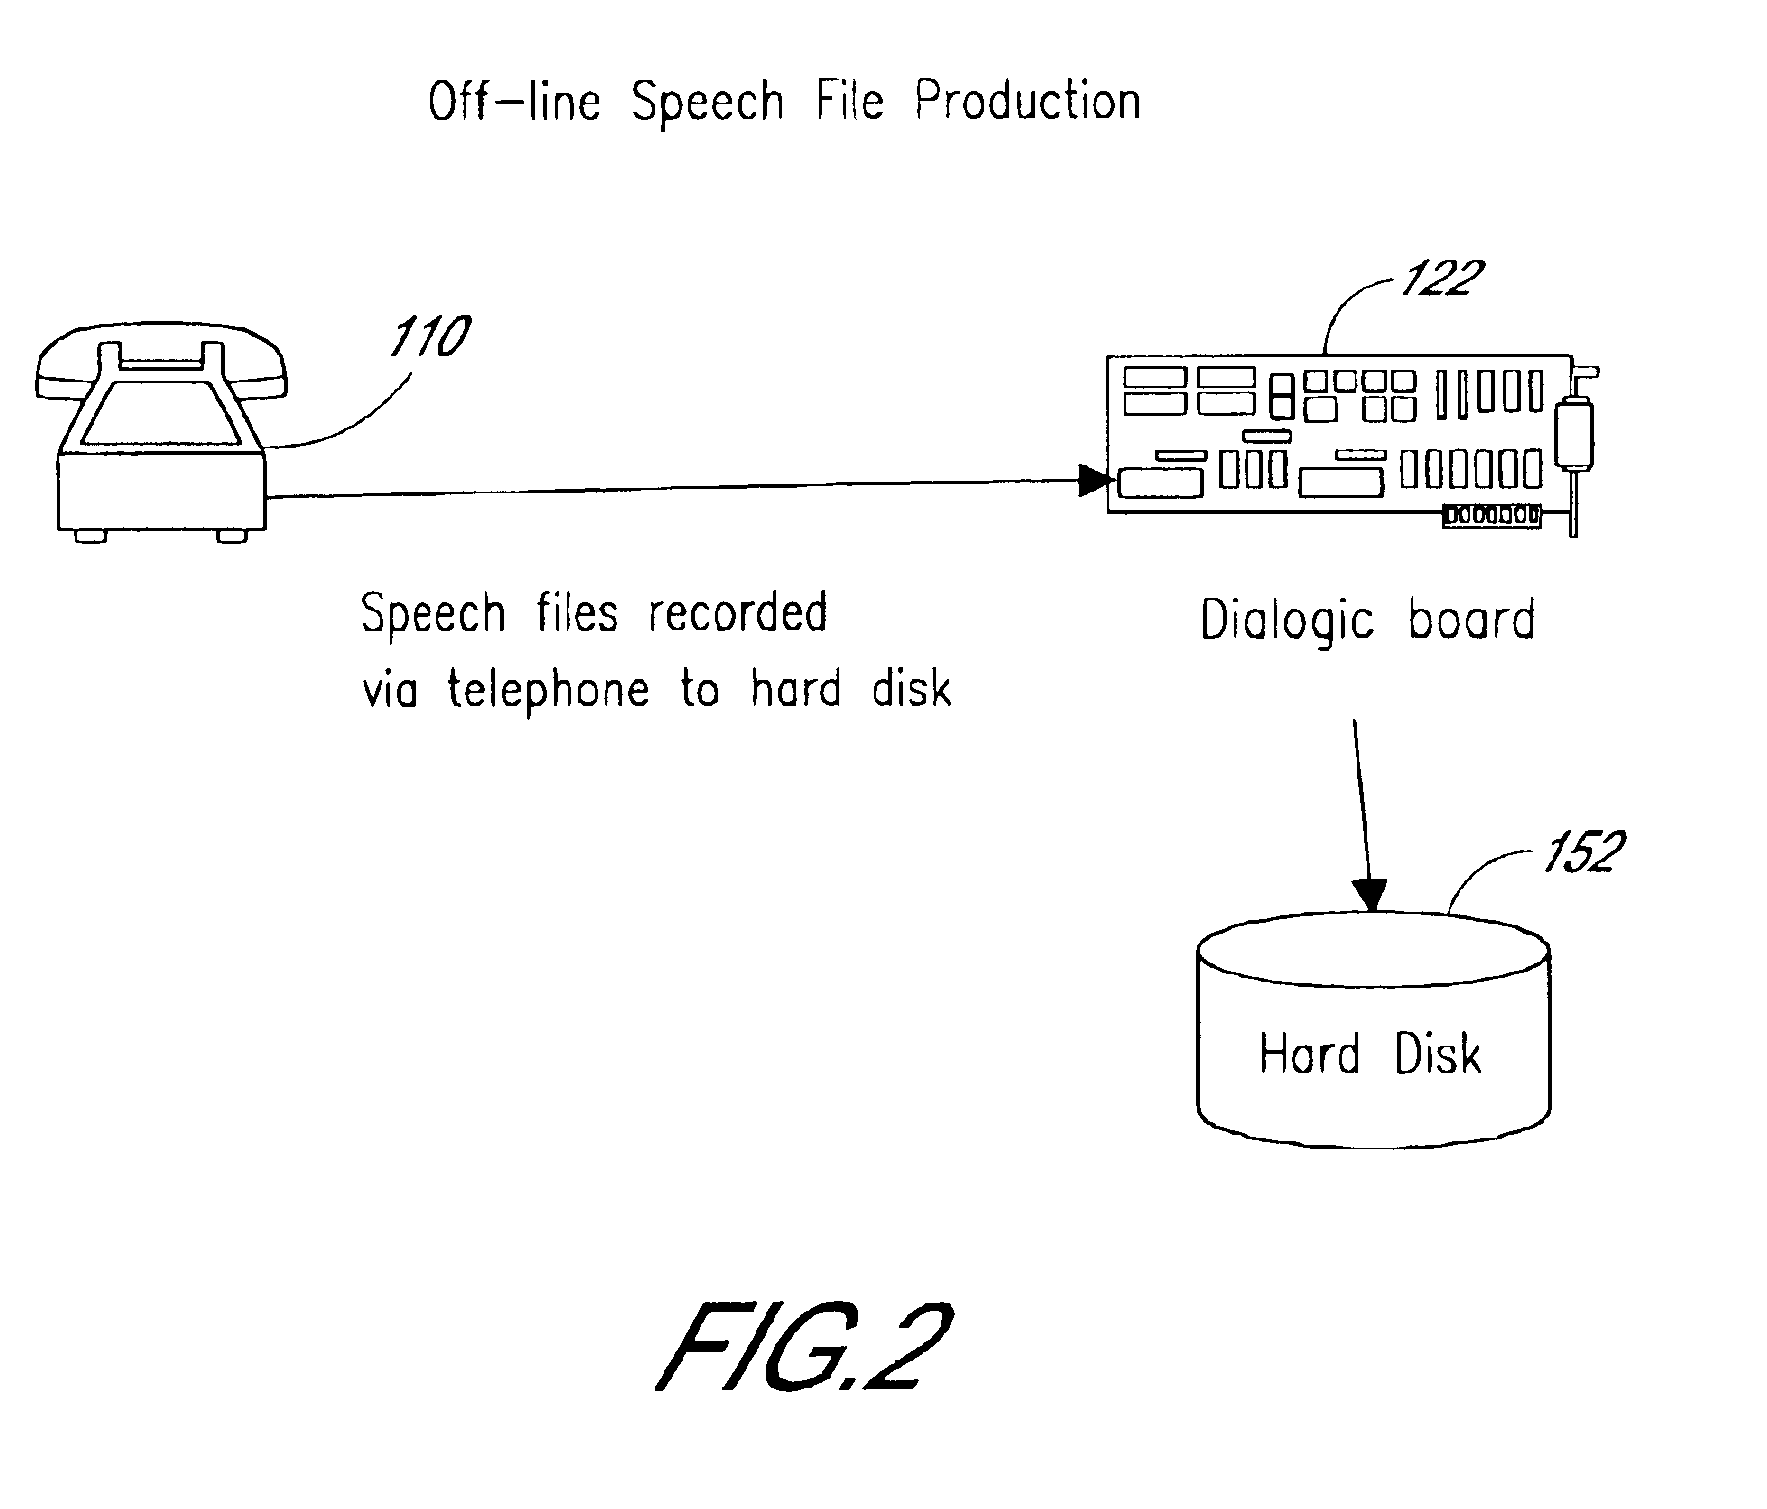 Computerized medical diagnostic and treatment advice system including network access